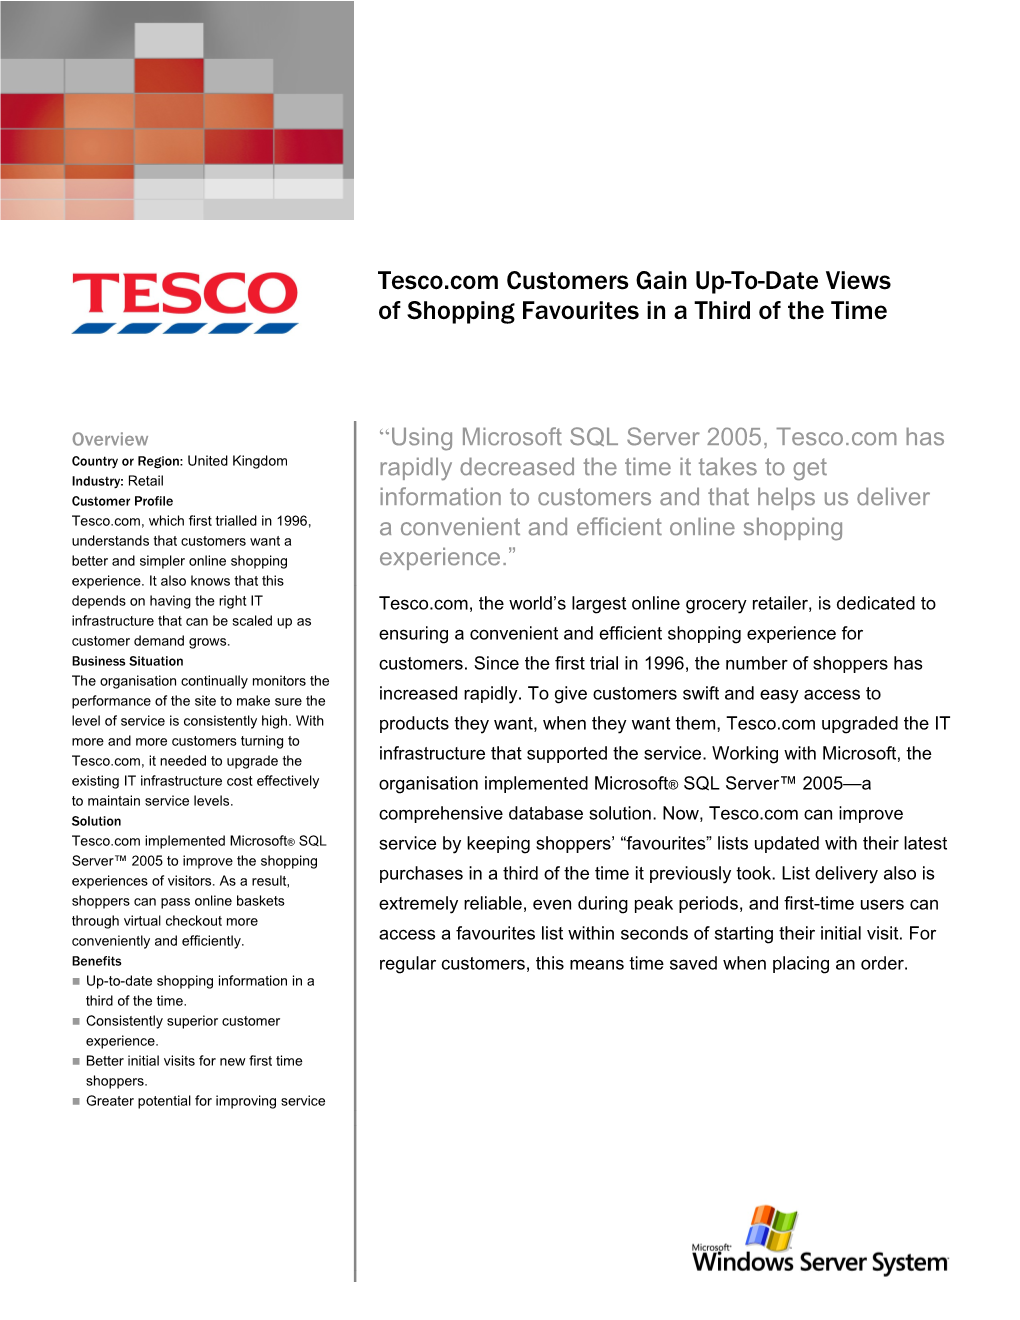 Tesco.Com Customers Gain Up-To-Date Views of Shopping Favourites in a Third of the Time